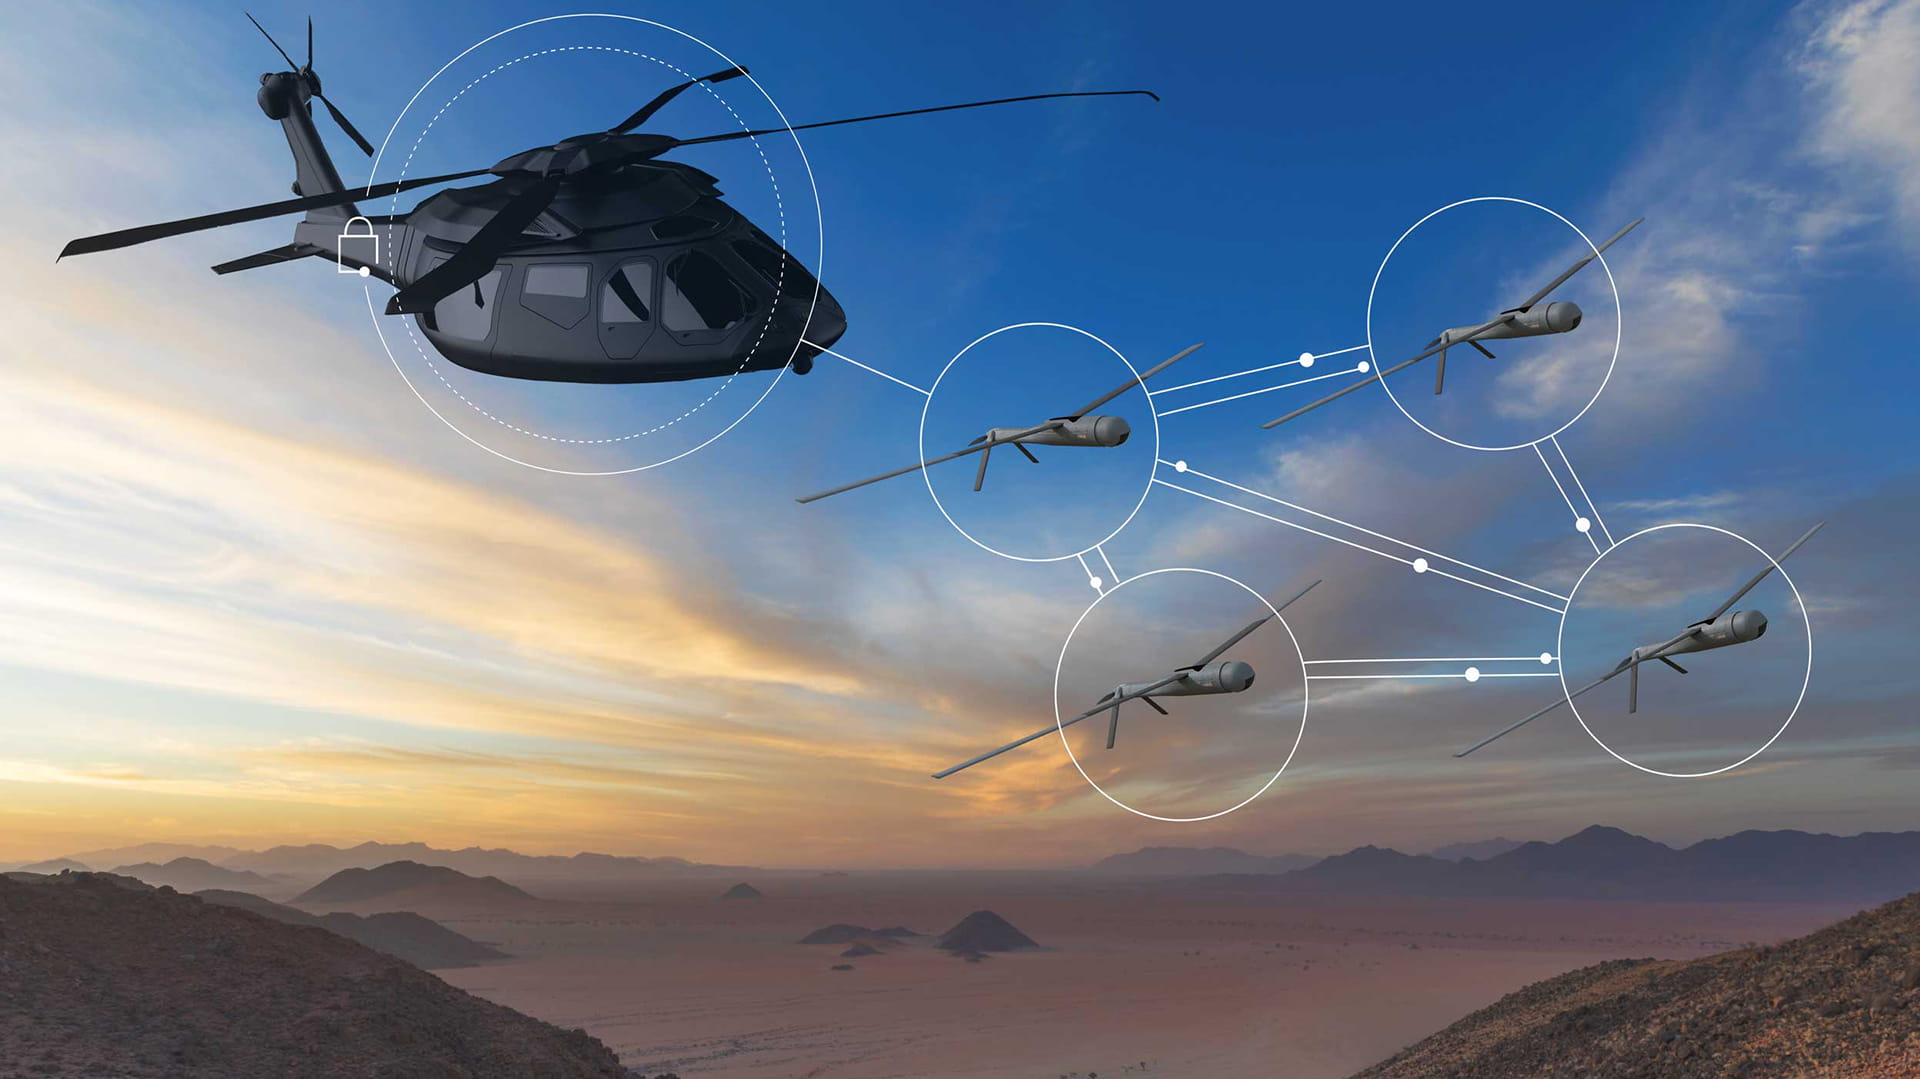 Illustration of a helicopter and four drones